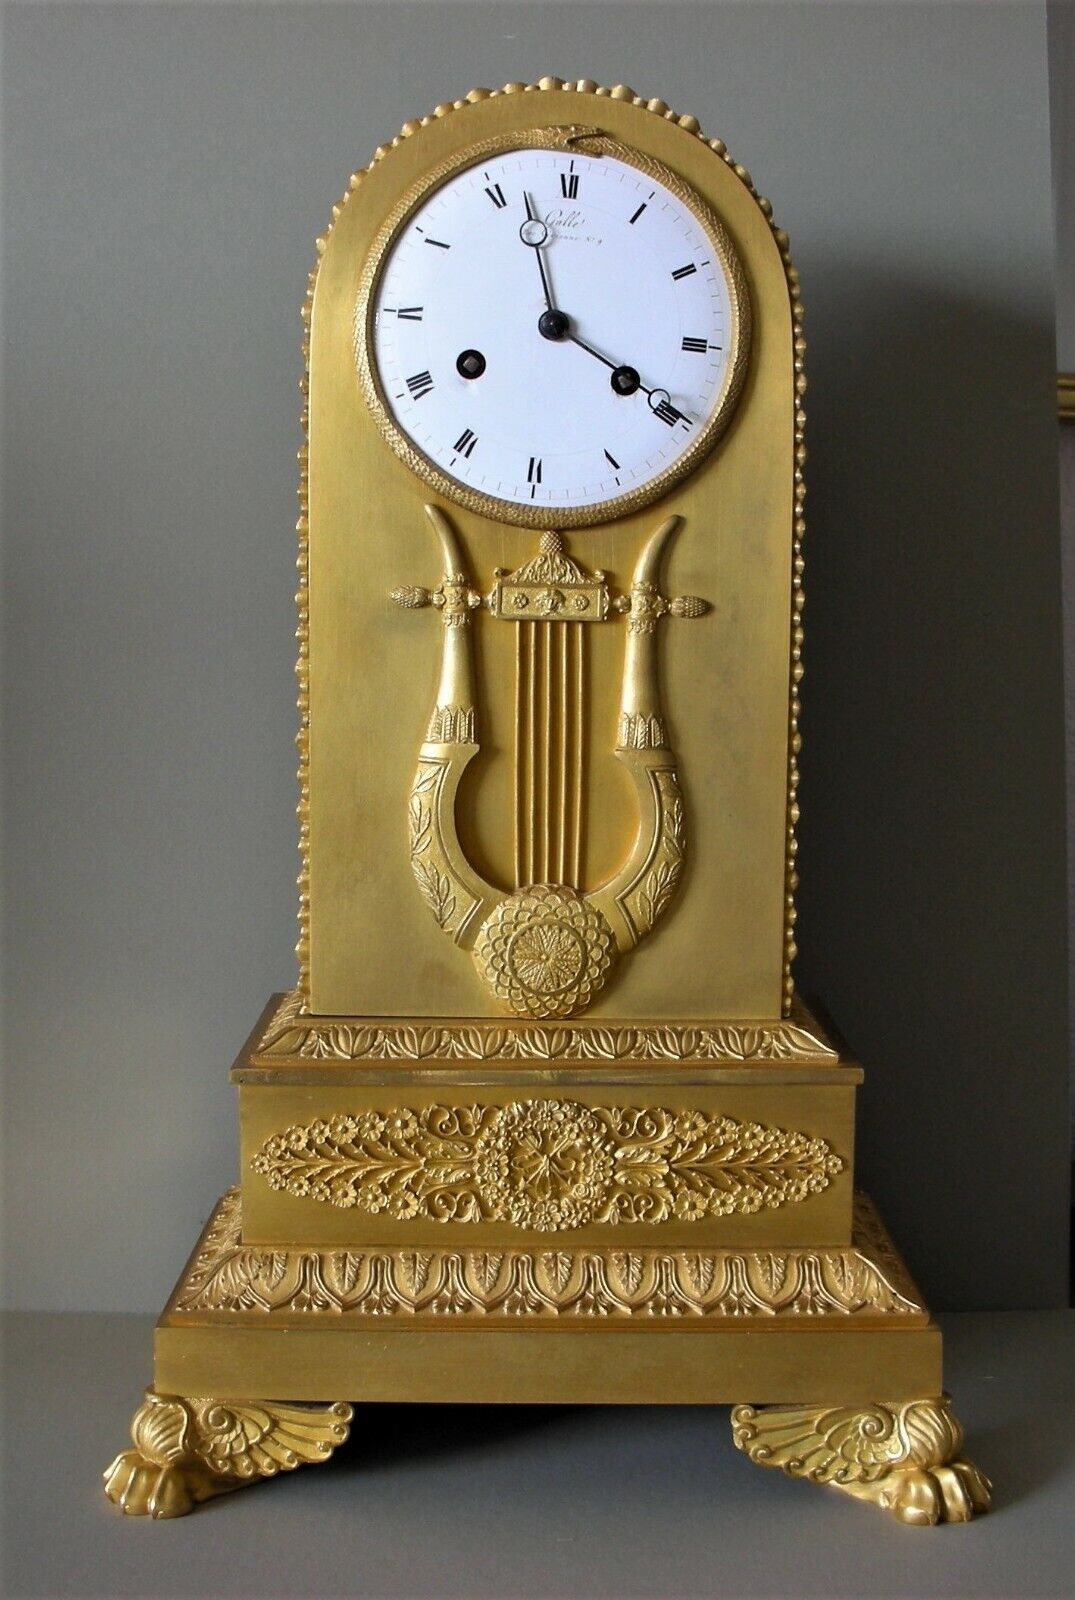 FINEST ANTIQUE GILT BRONZE FRENCH MANTEL CLOCK BY CLAUDE GALLE  CIRCA 1790-1800